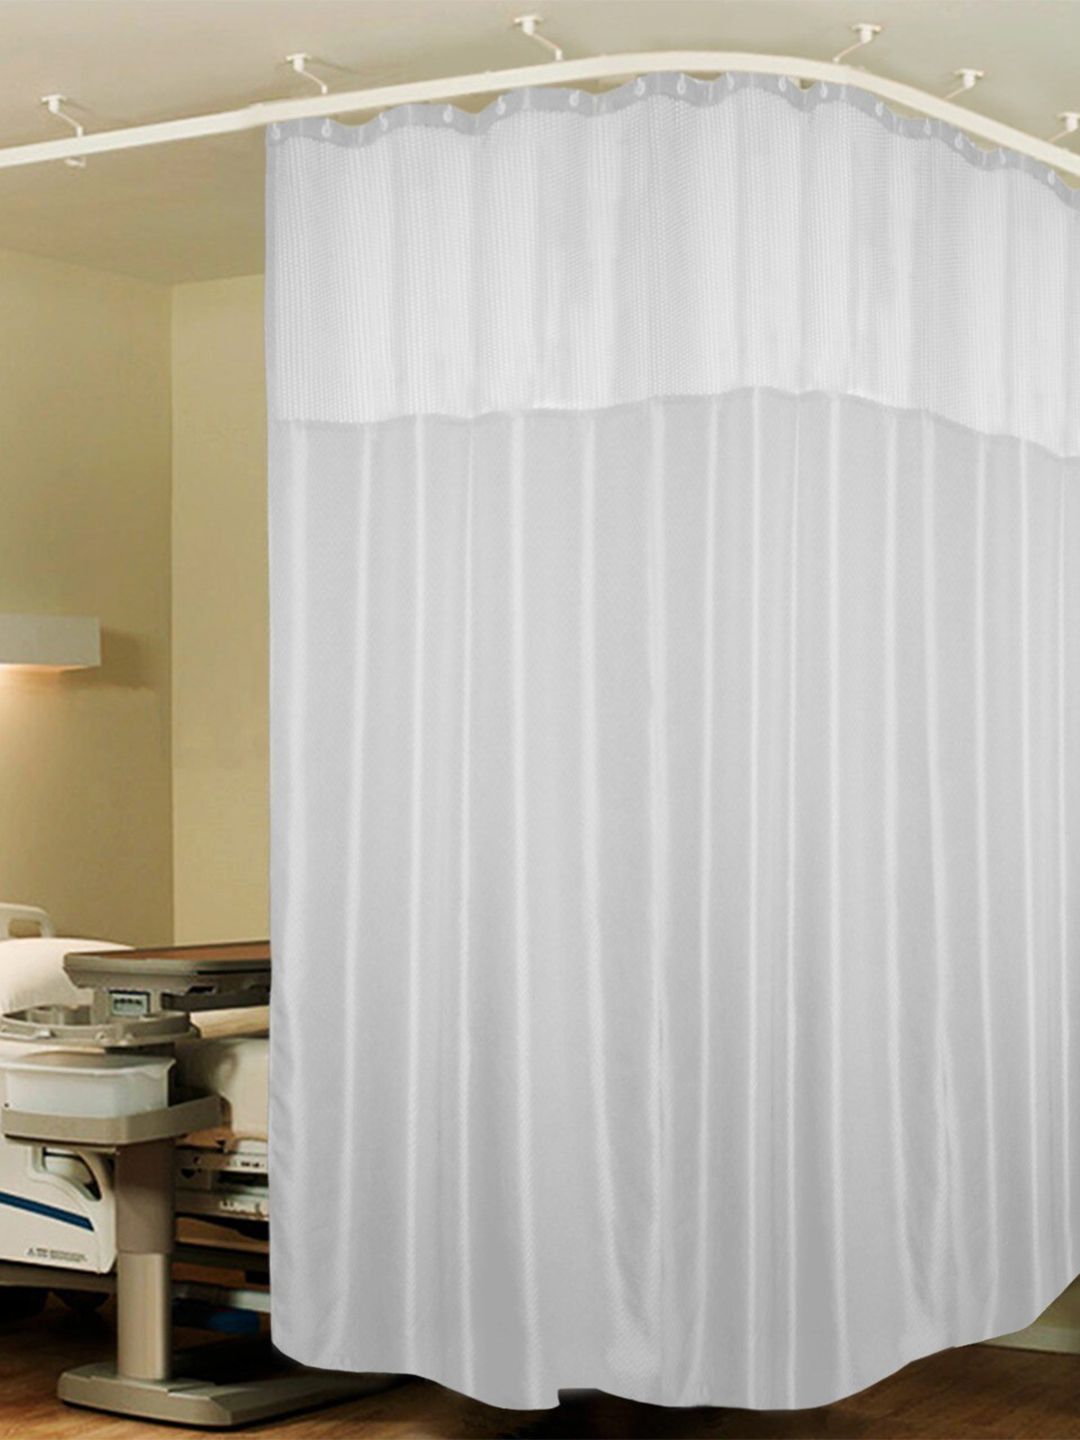 Lushomes White Zig Zag ICU 3 Panel Bed Partition Hospital Curtain Price in India